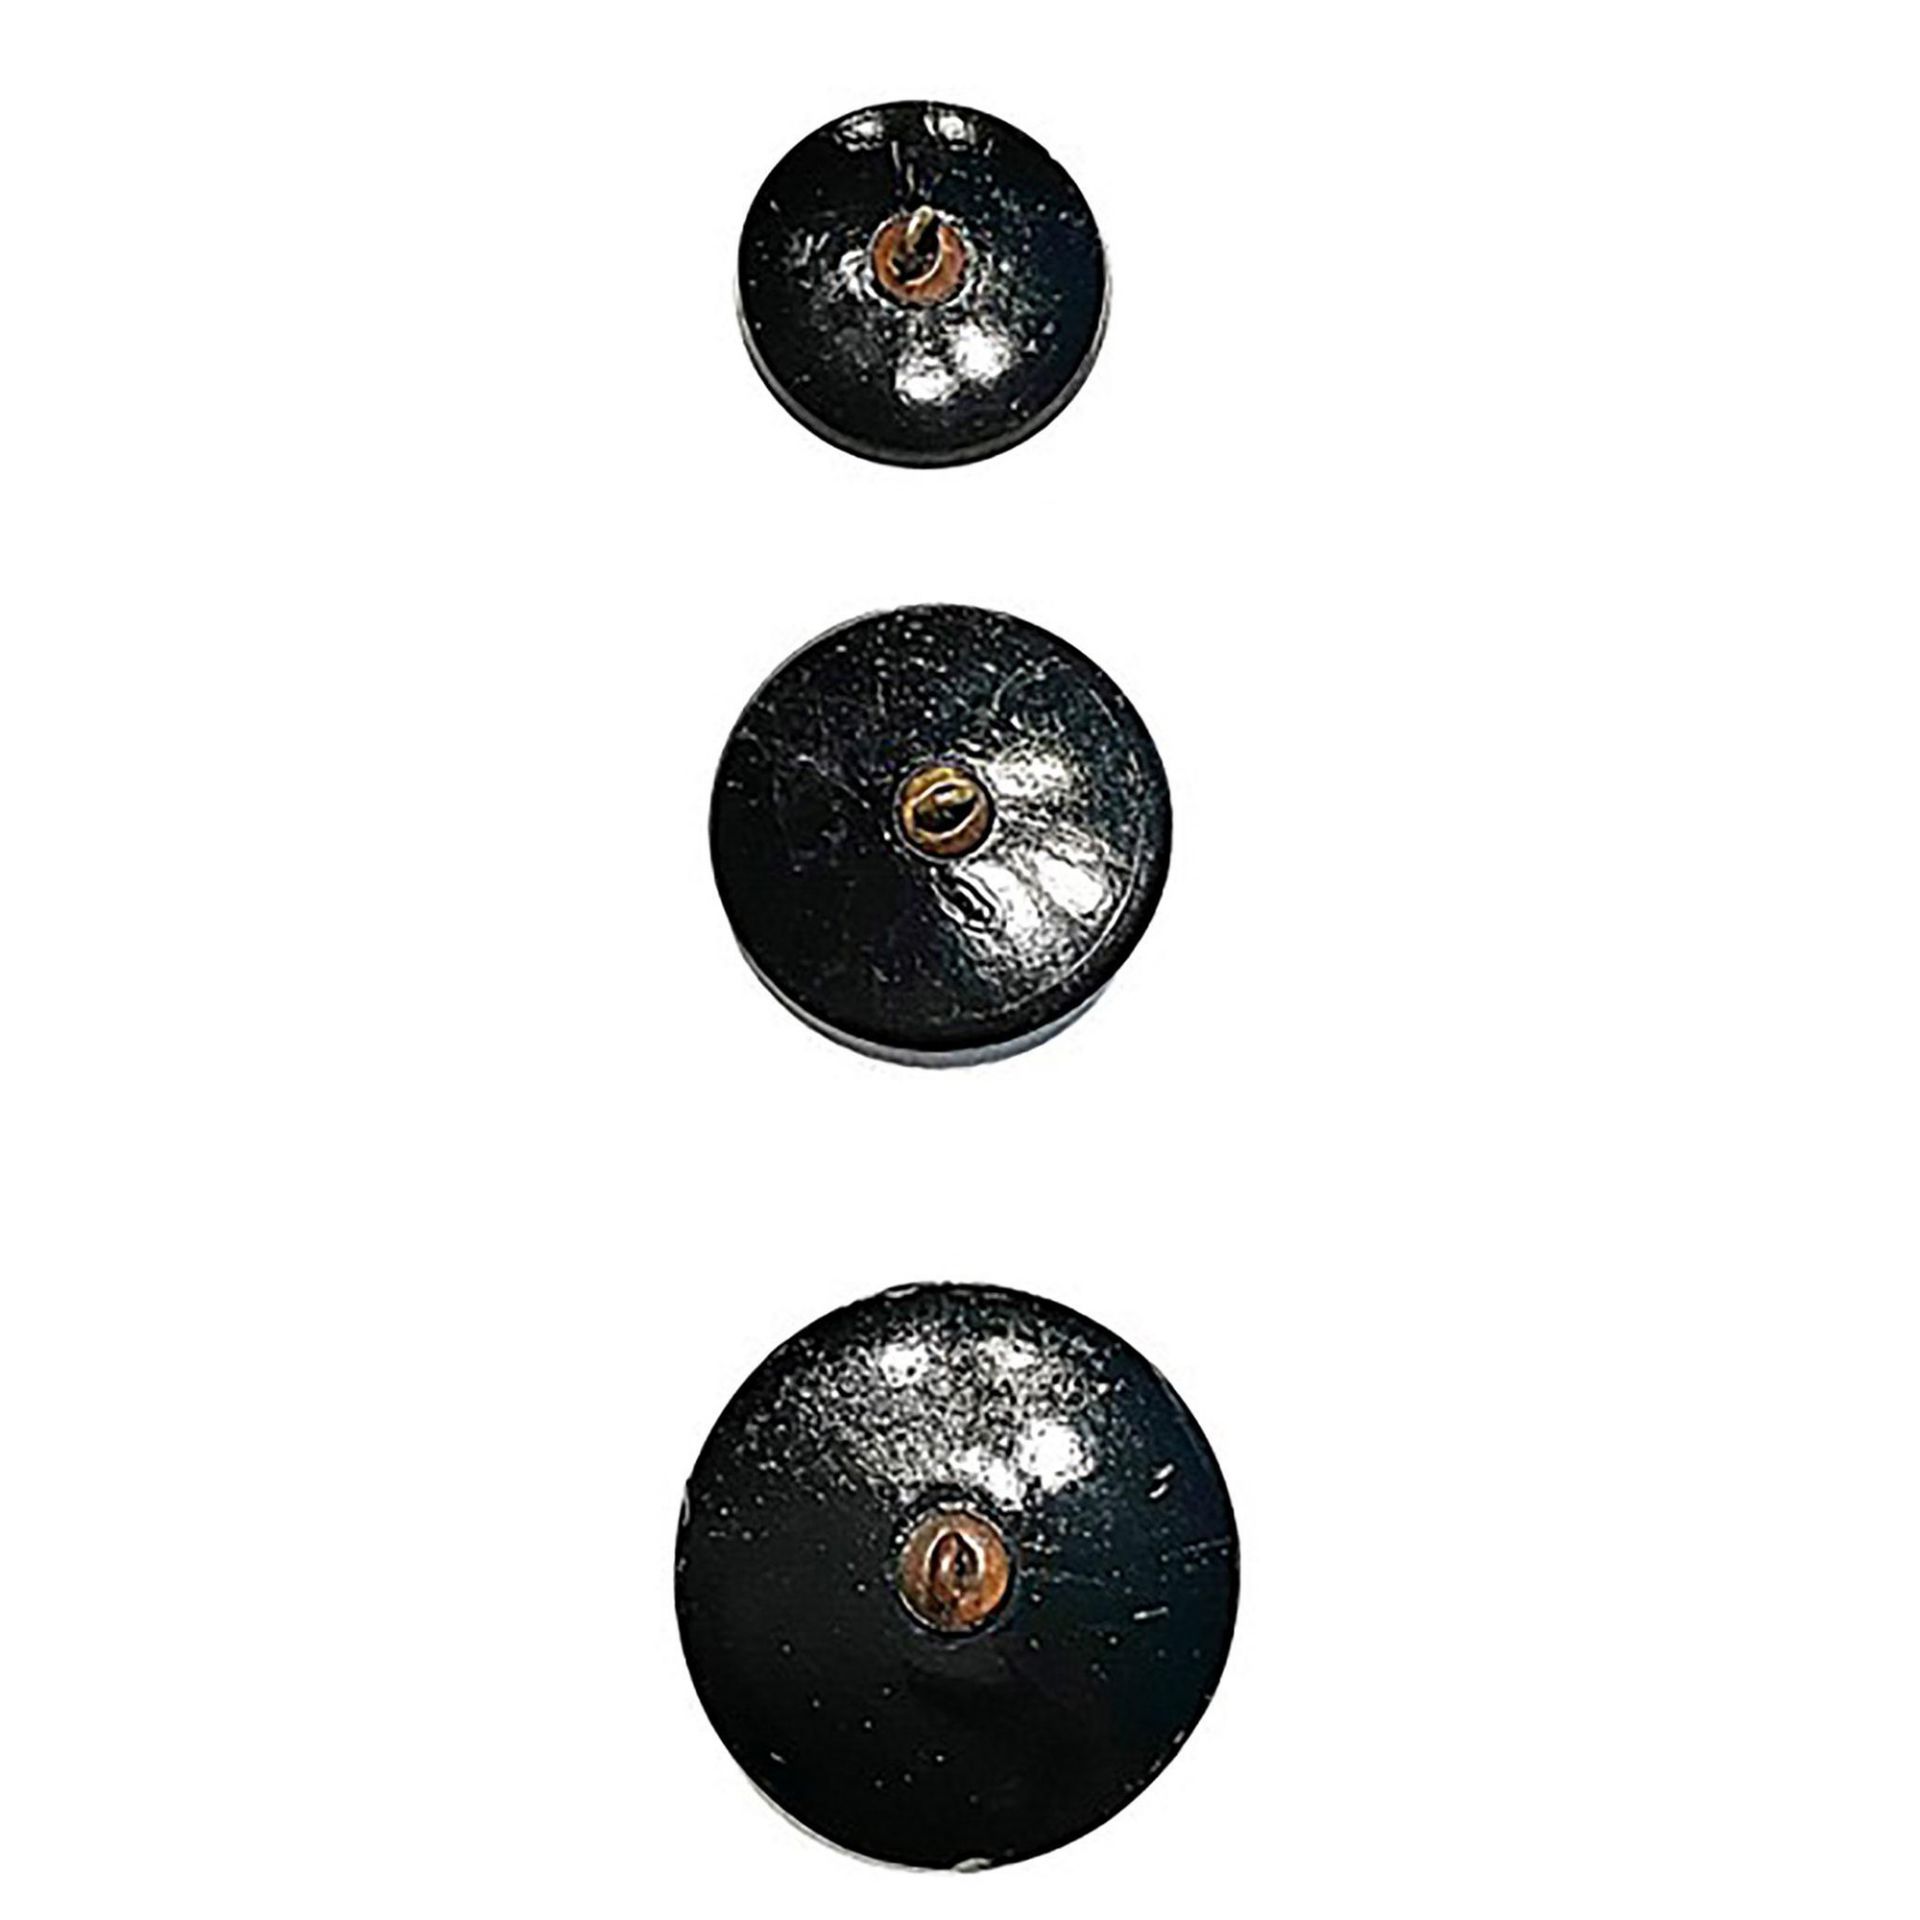 Small card of division 1 pictorial black glass buttons - Image 5 of 5